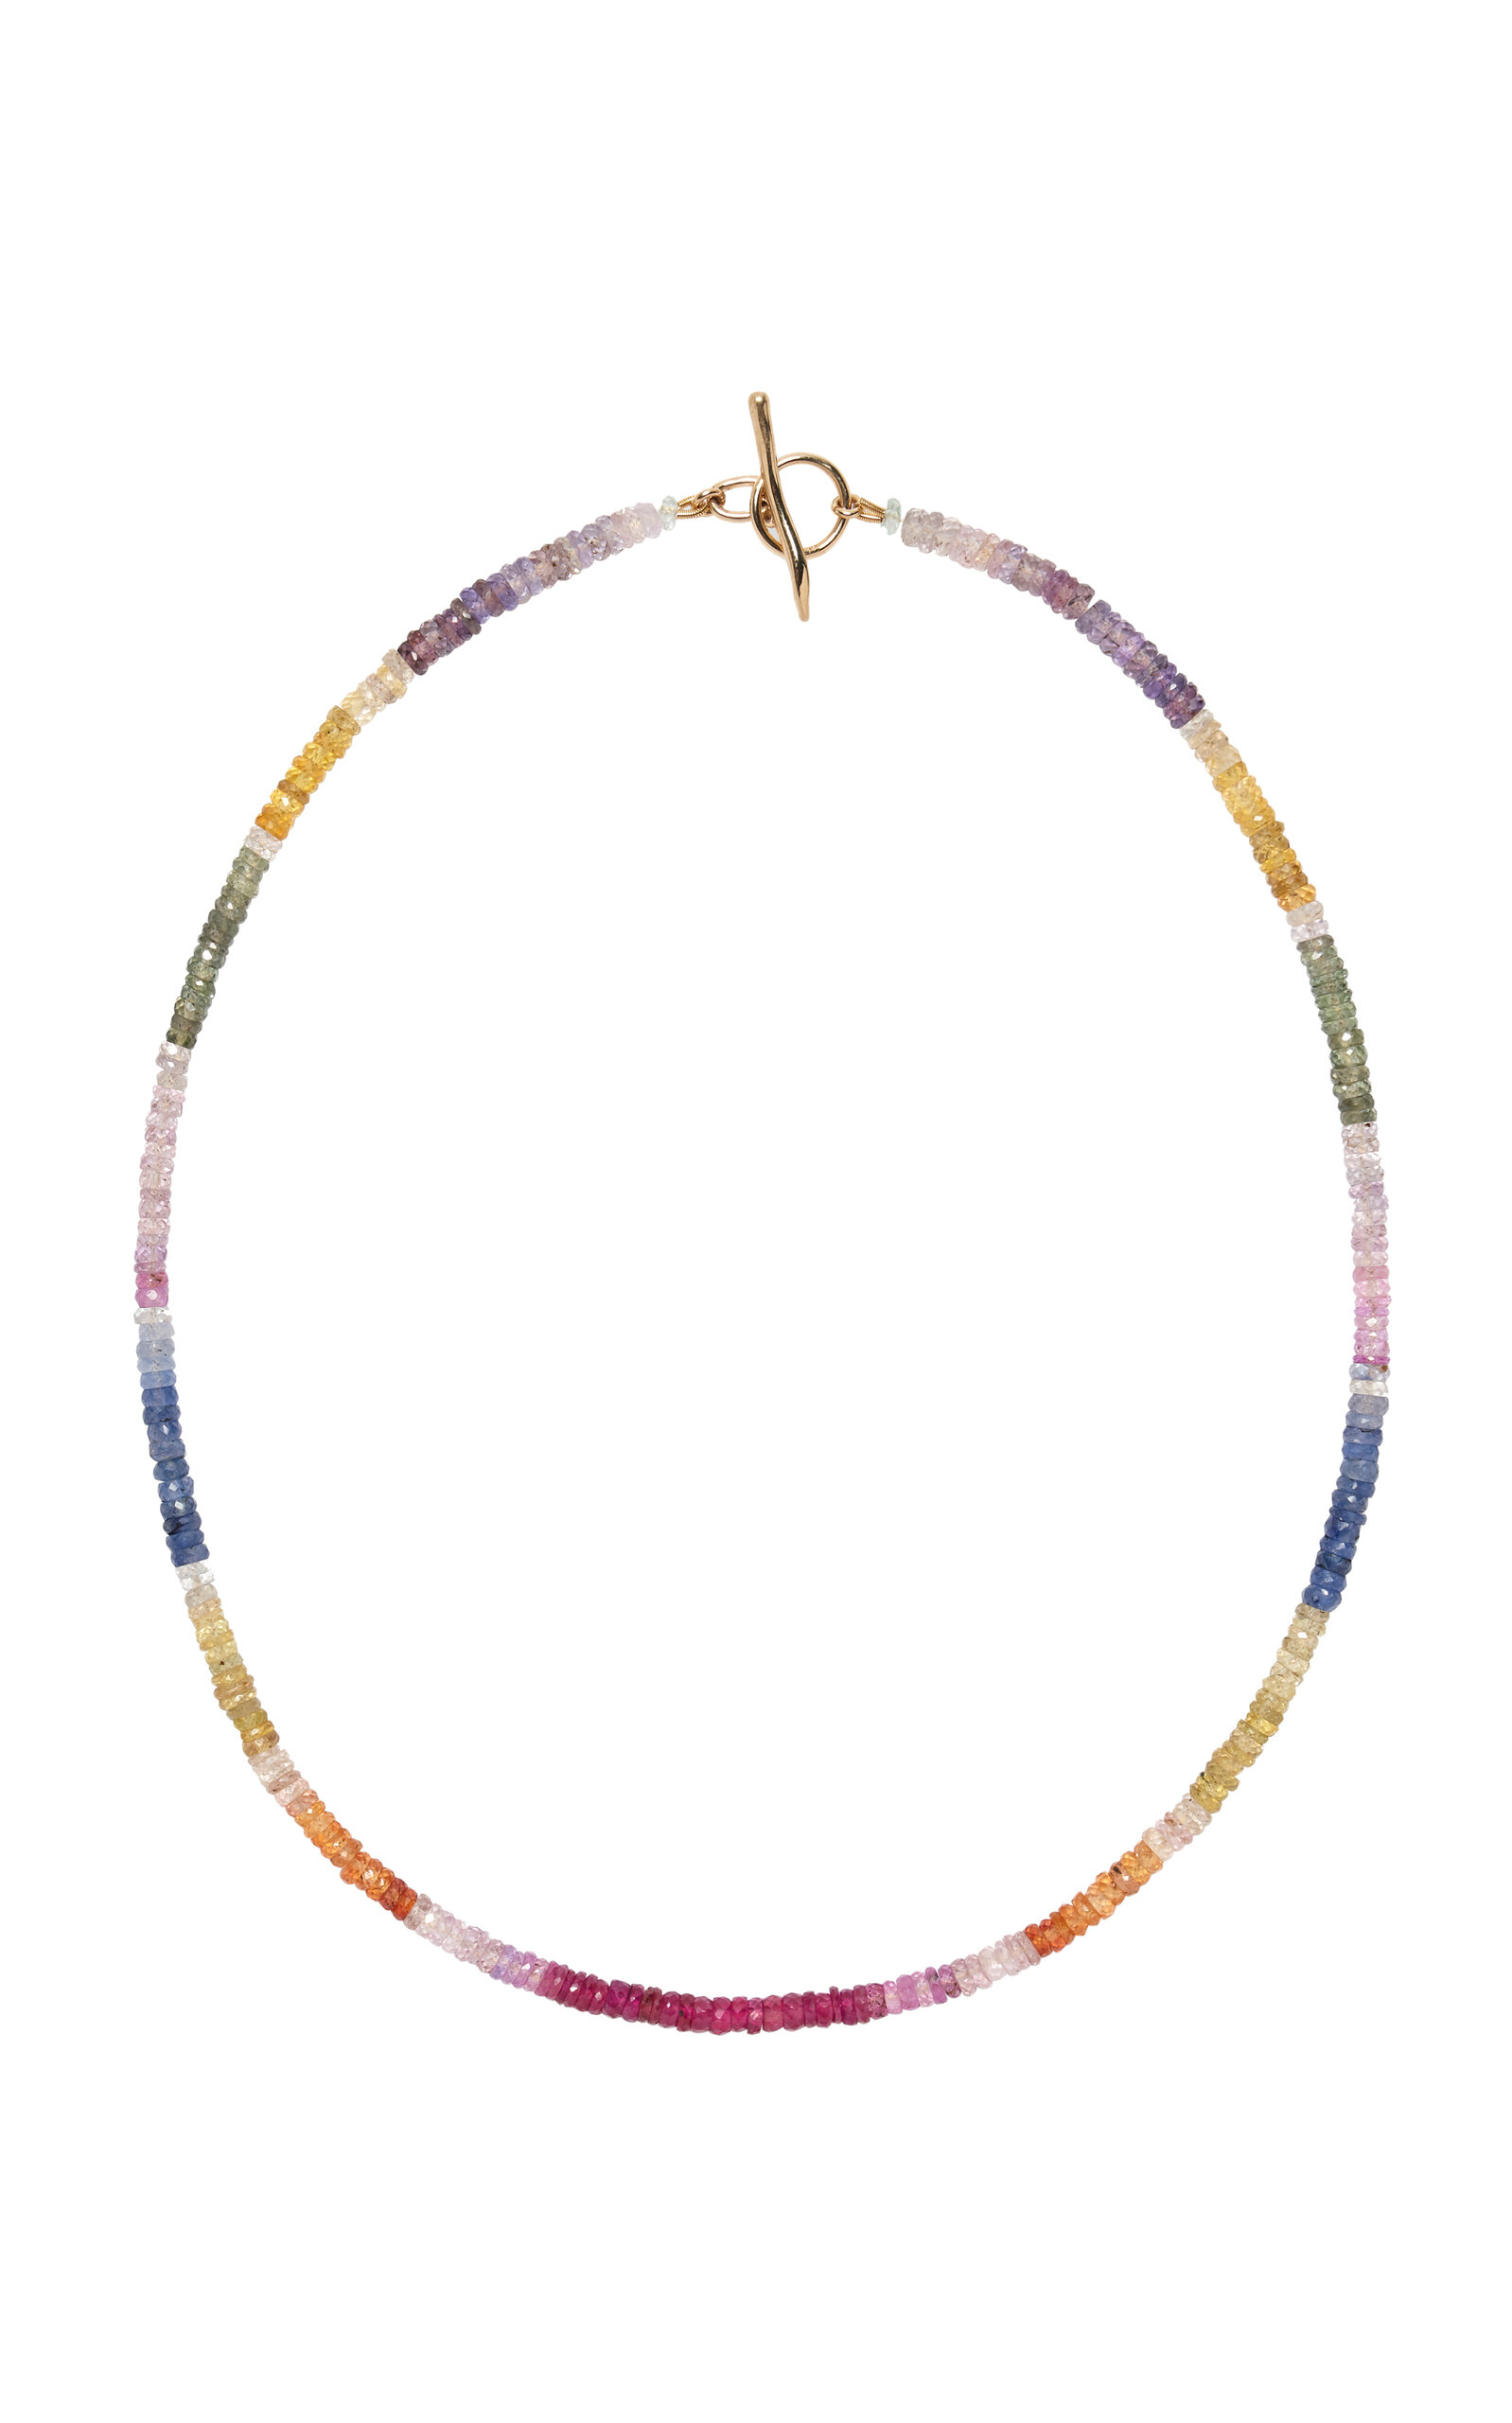 Brilliant Shaded Sapphire and 14k Gold Necklace